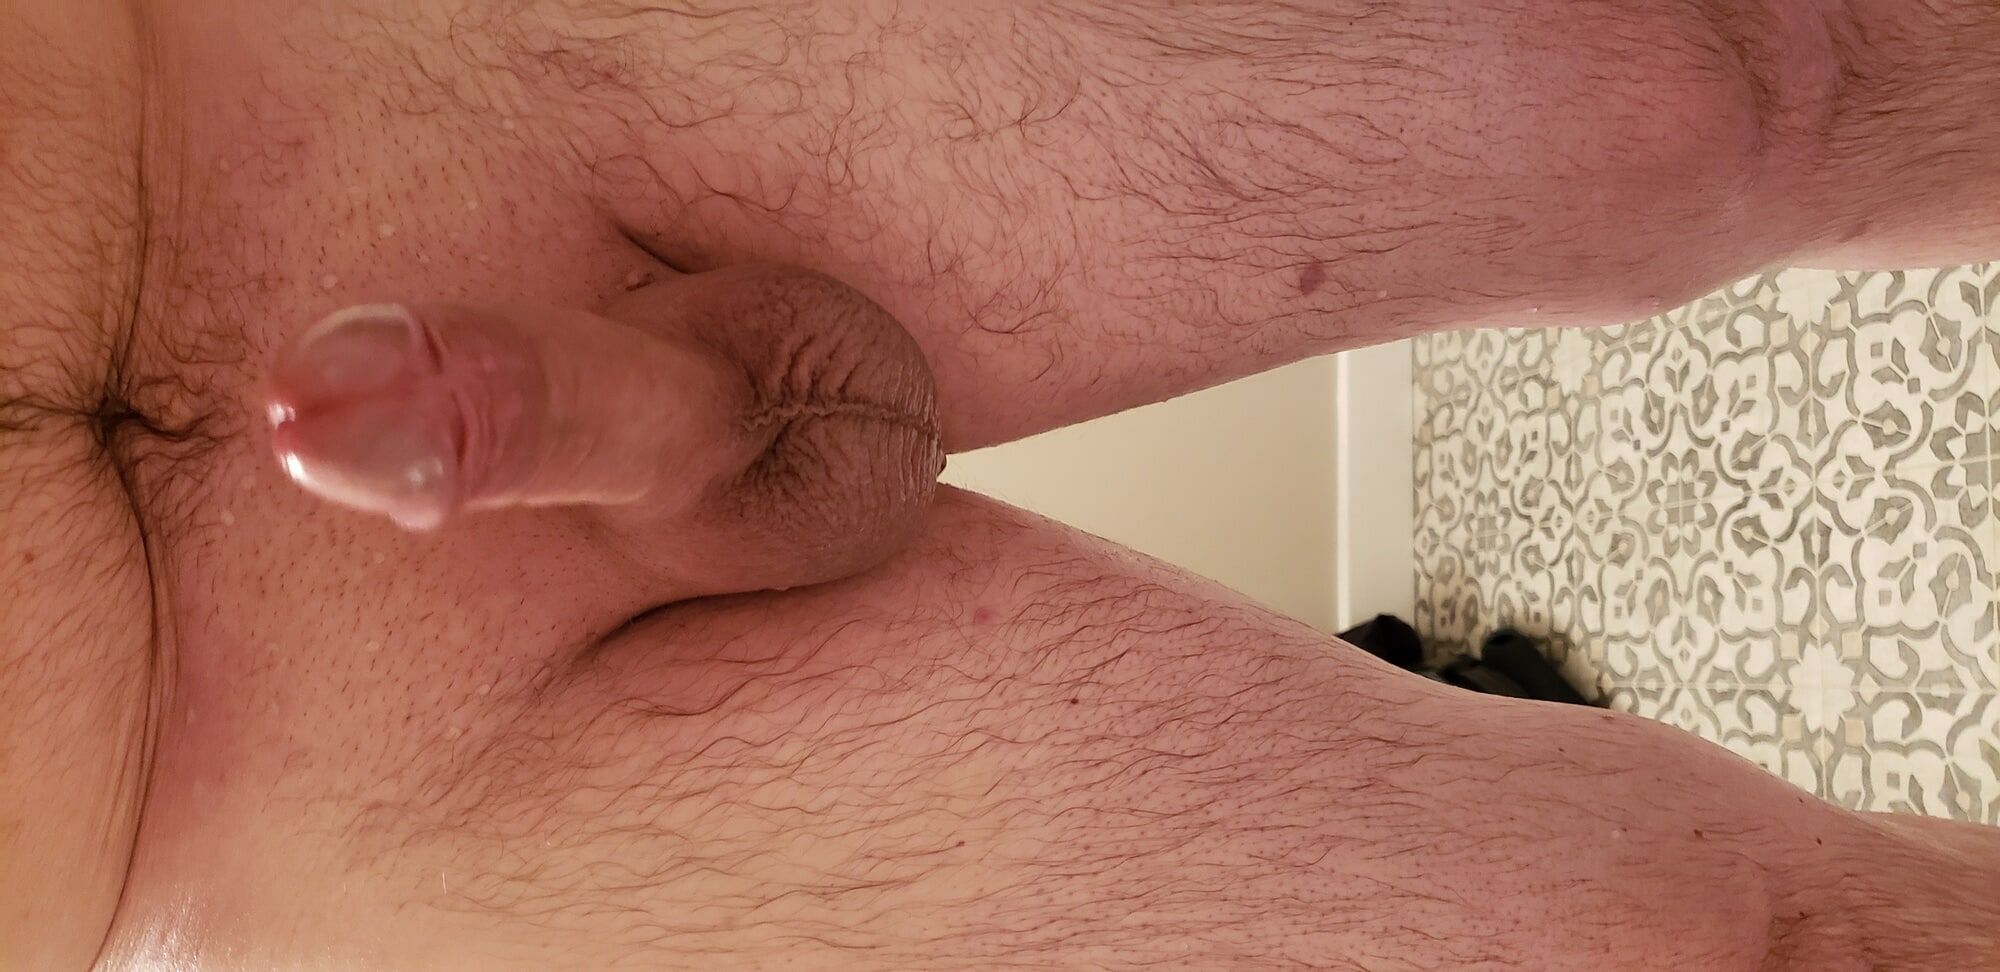 Me and my Penis #42